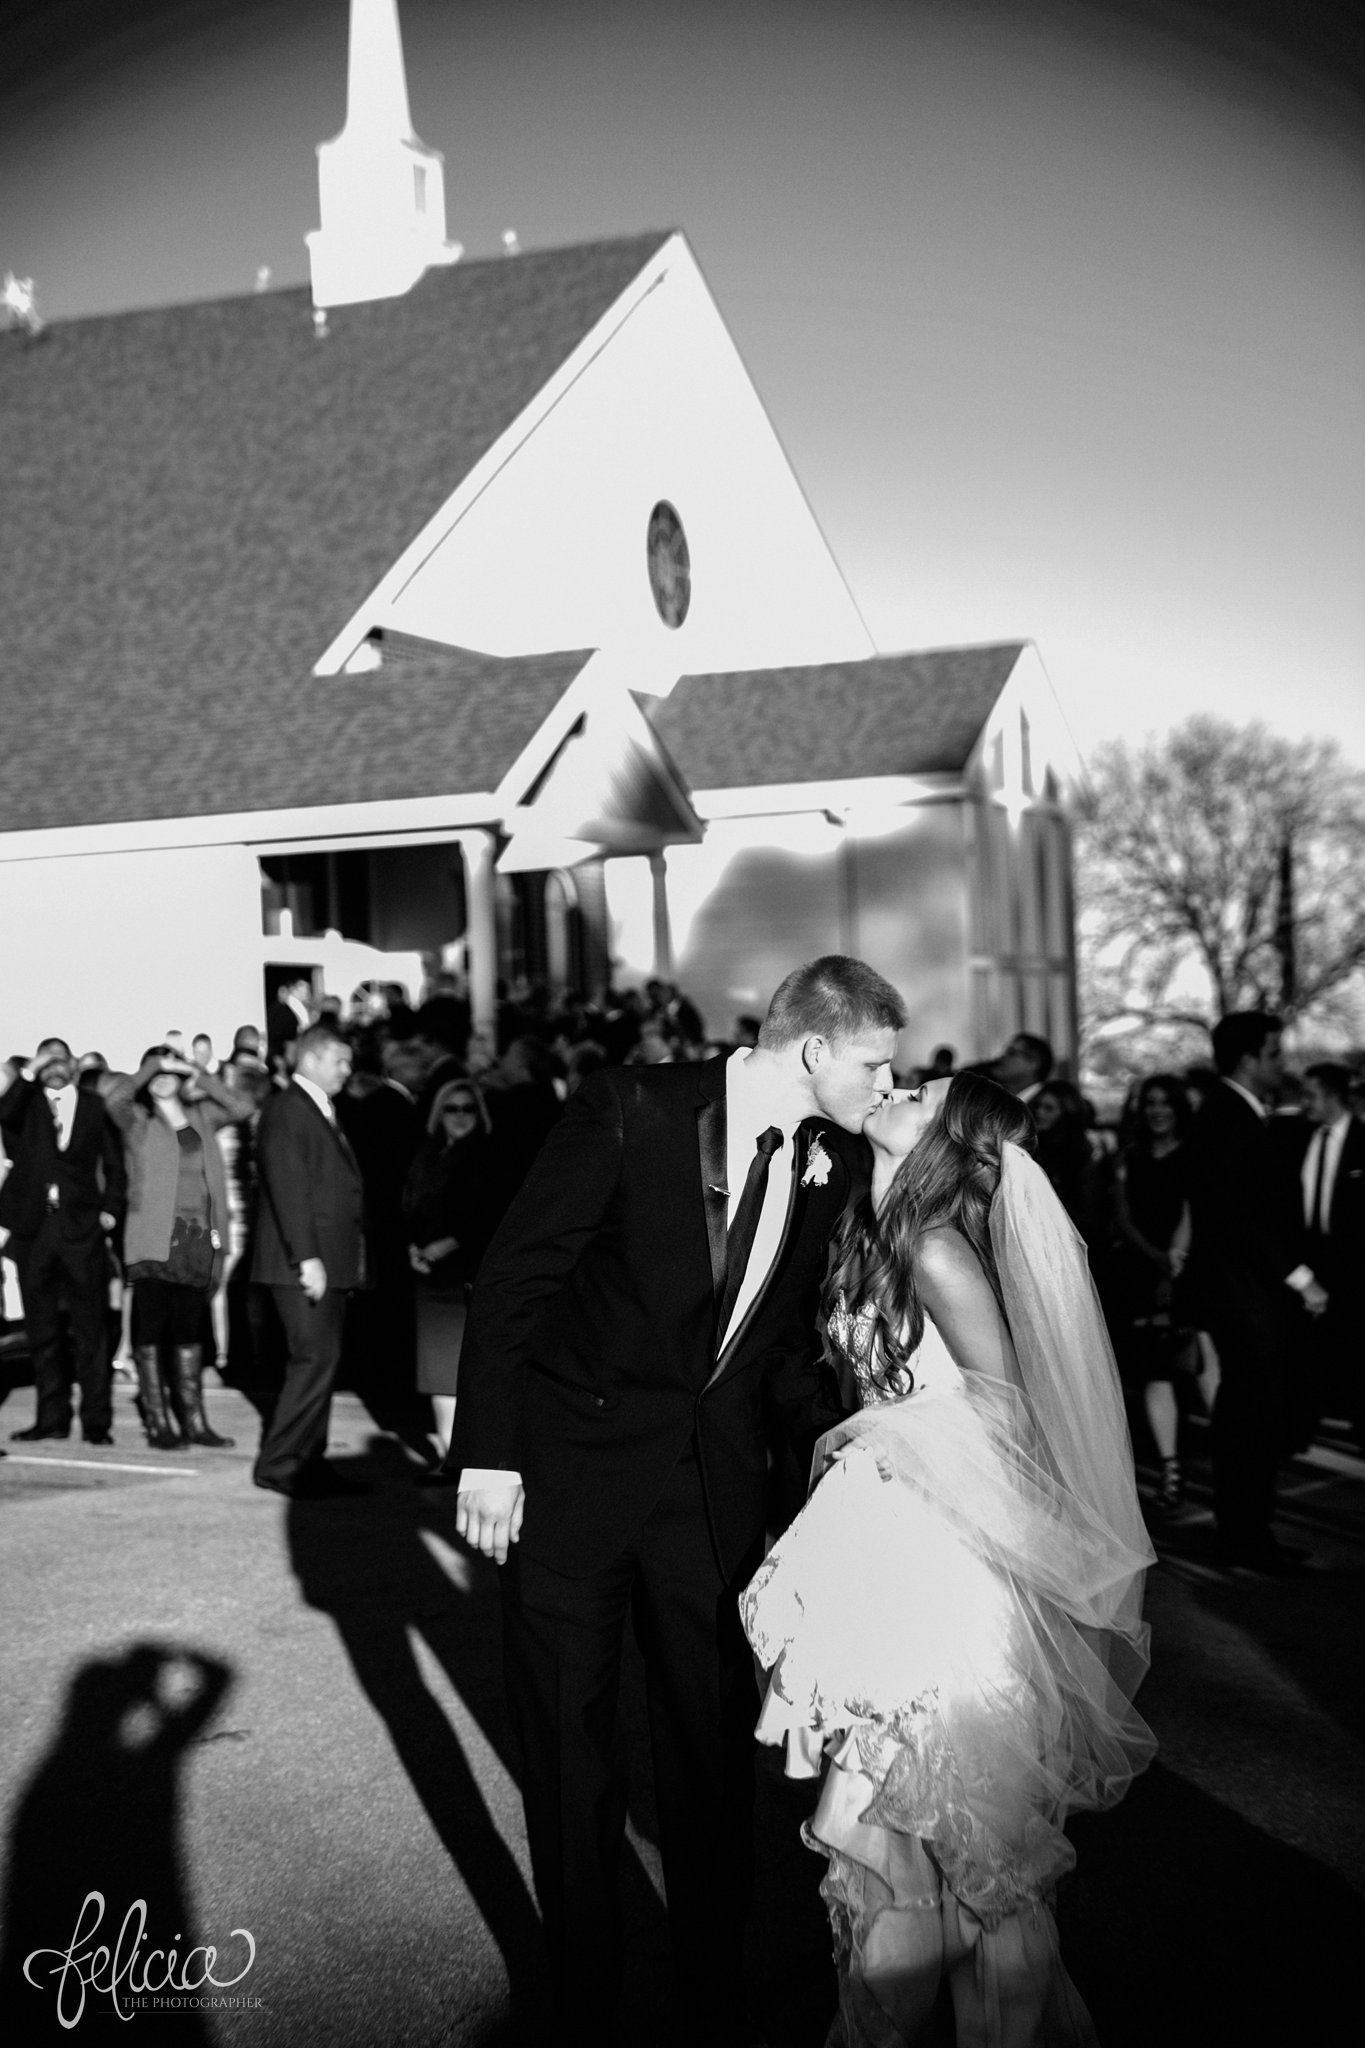 black and white | wedding | wedding photos | industrial | Rumely Event Space | wedding photography | images by feliciathephotographer.com | West Bottoms | wedding ceremony | The Providence Baptist Church | bride and groom | Mr. and Mrs. | exiting the church | kissing outside of church | kissing | man and wife 